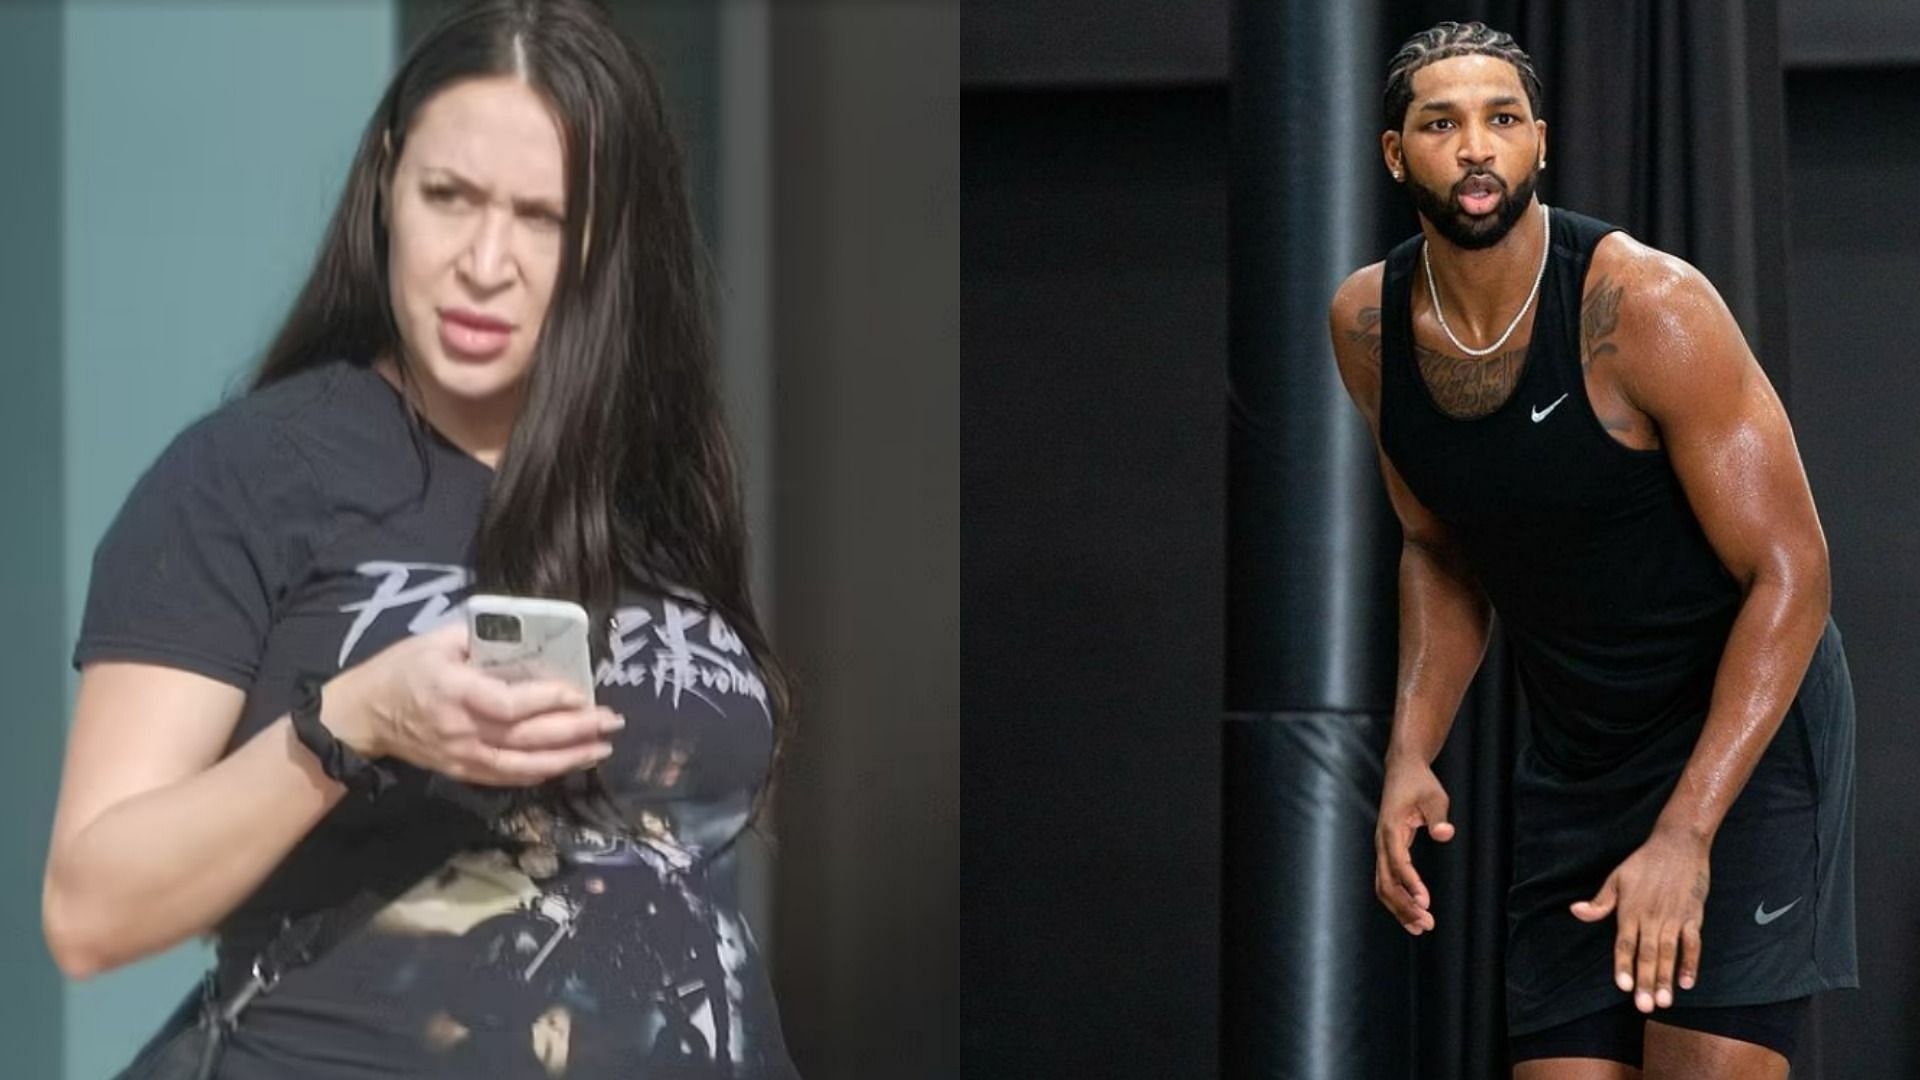 Who is Maralee Nichols? Tristan Thompson memes trend after 'baby mama